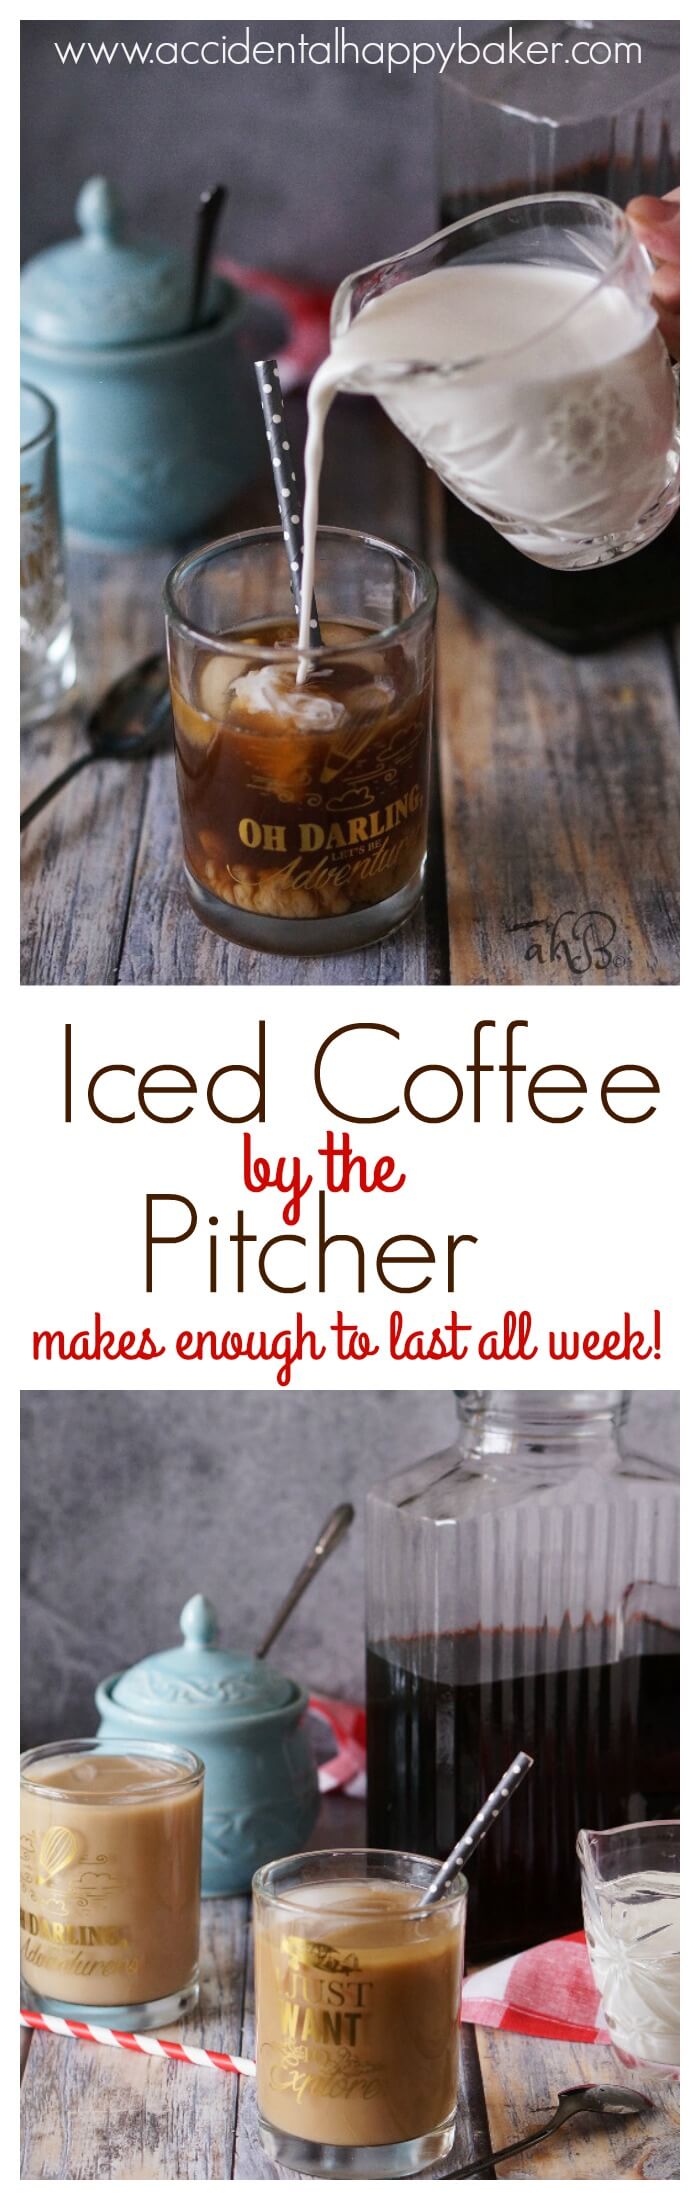 3 simple steps and you’ve got a pitcher of delicious iced coffee to last you the week! Say goodbye to expensive, over sweetened commercial iced coffee with this easy DIY recipe found on www.accidentalhappybaker.com @AHBamy